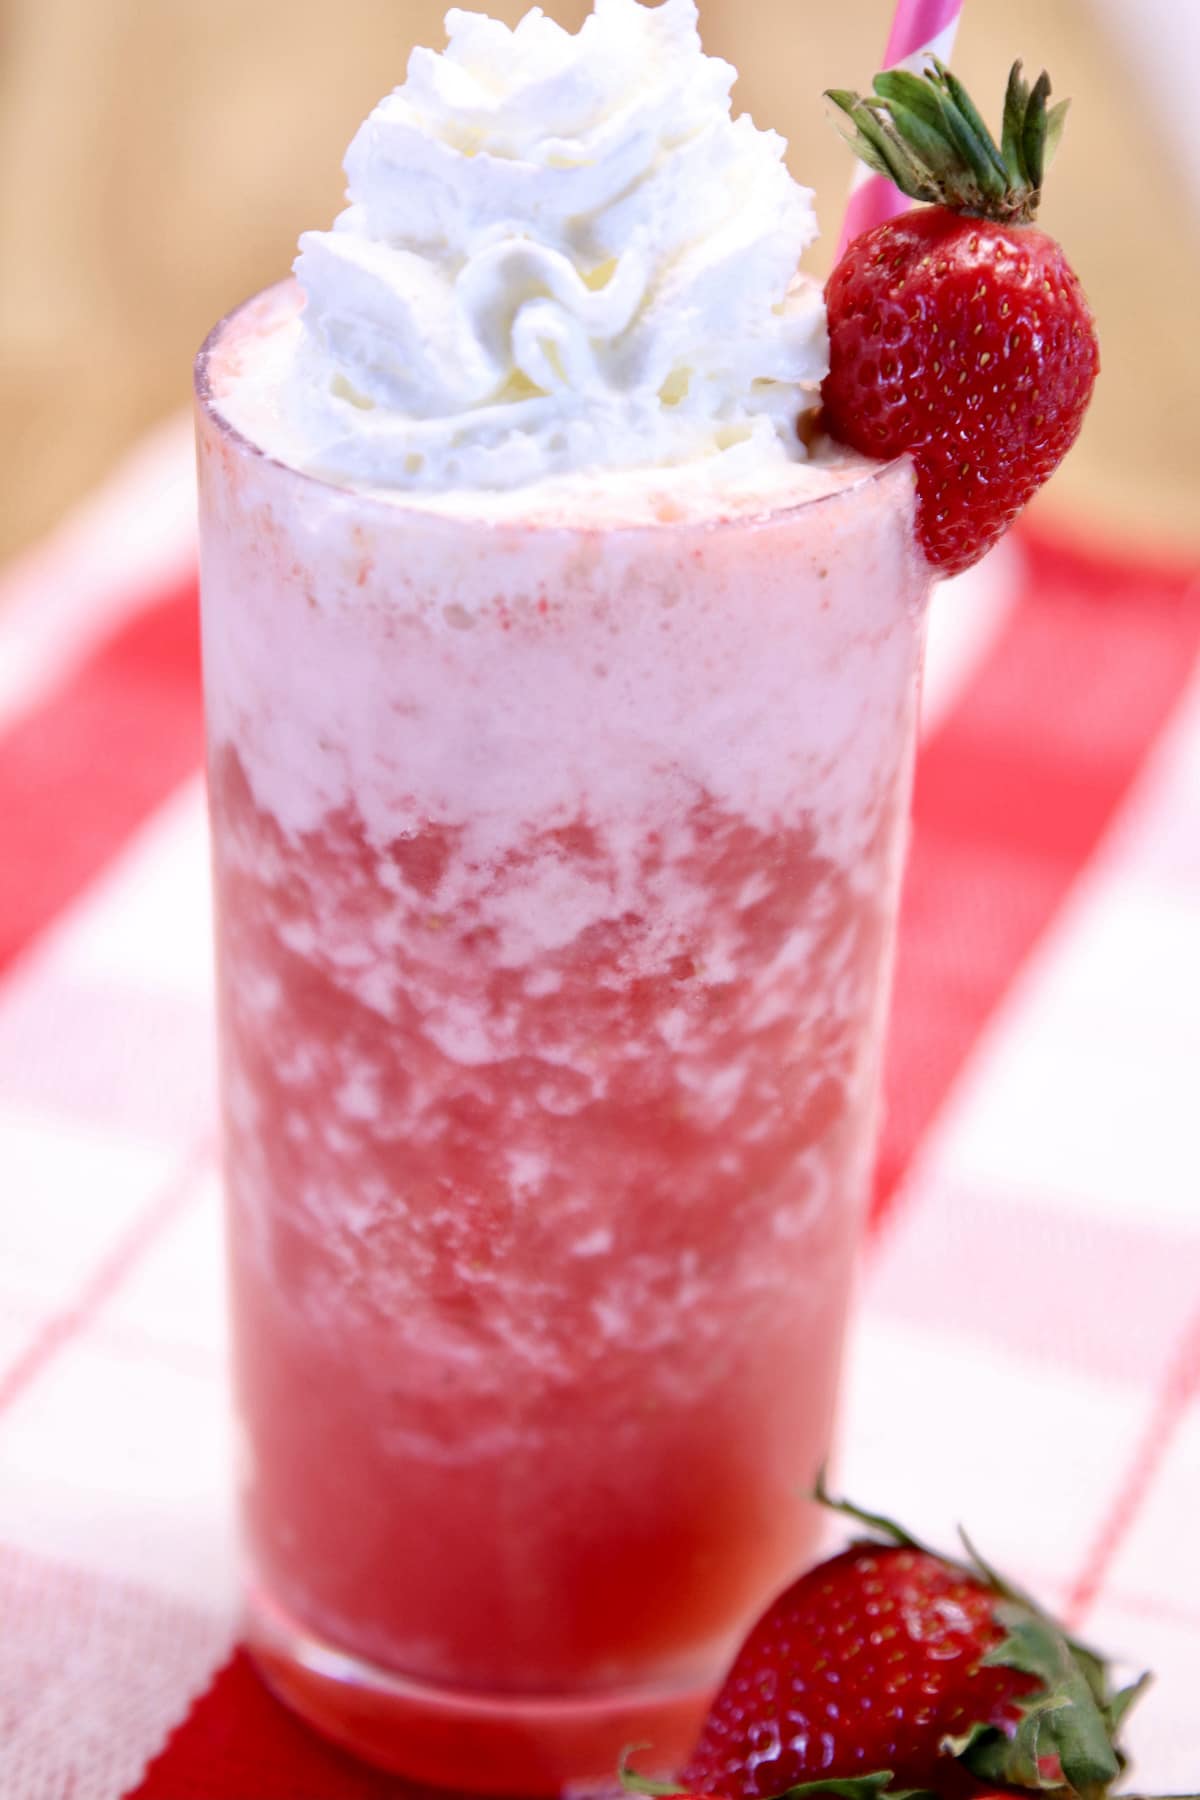 Strawberry Vodka Cocktail with whipped cream and strawberry garnish